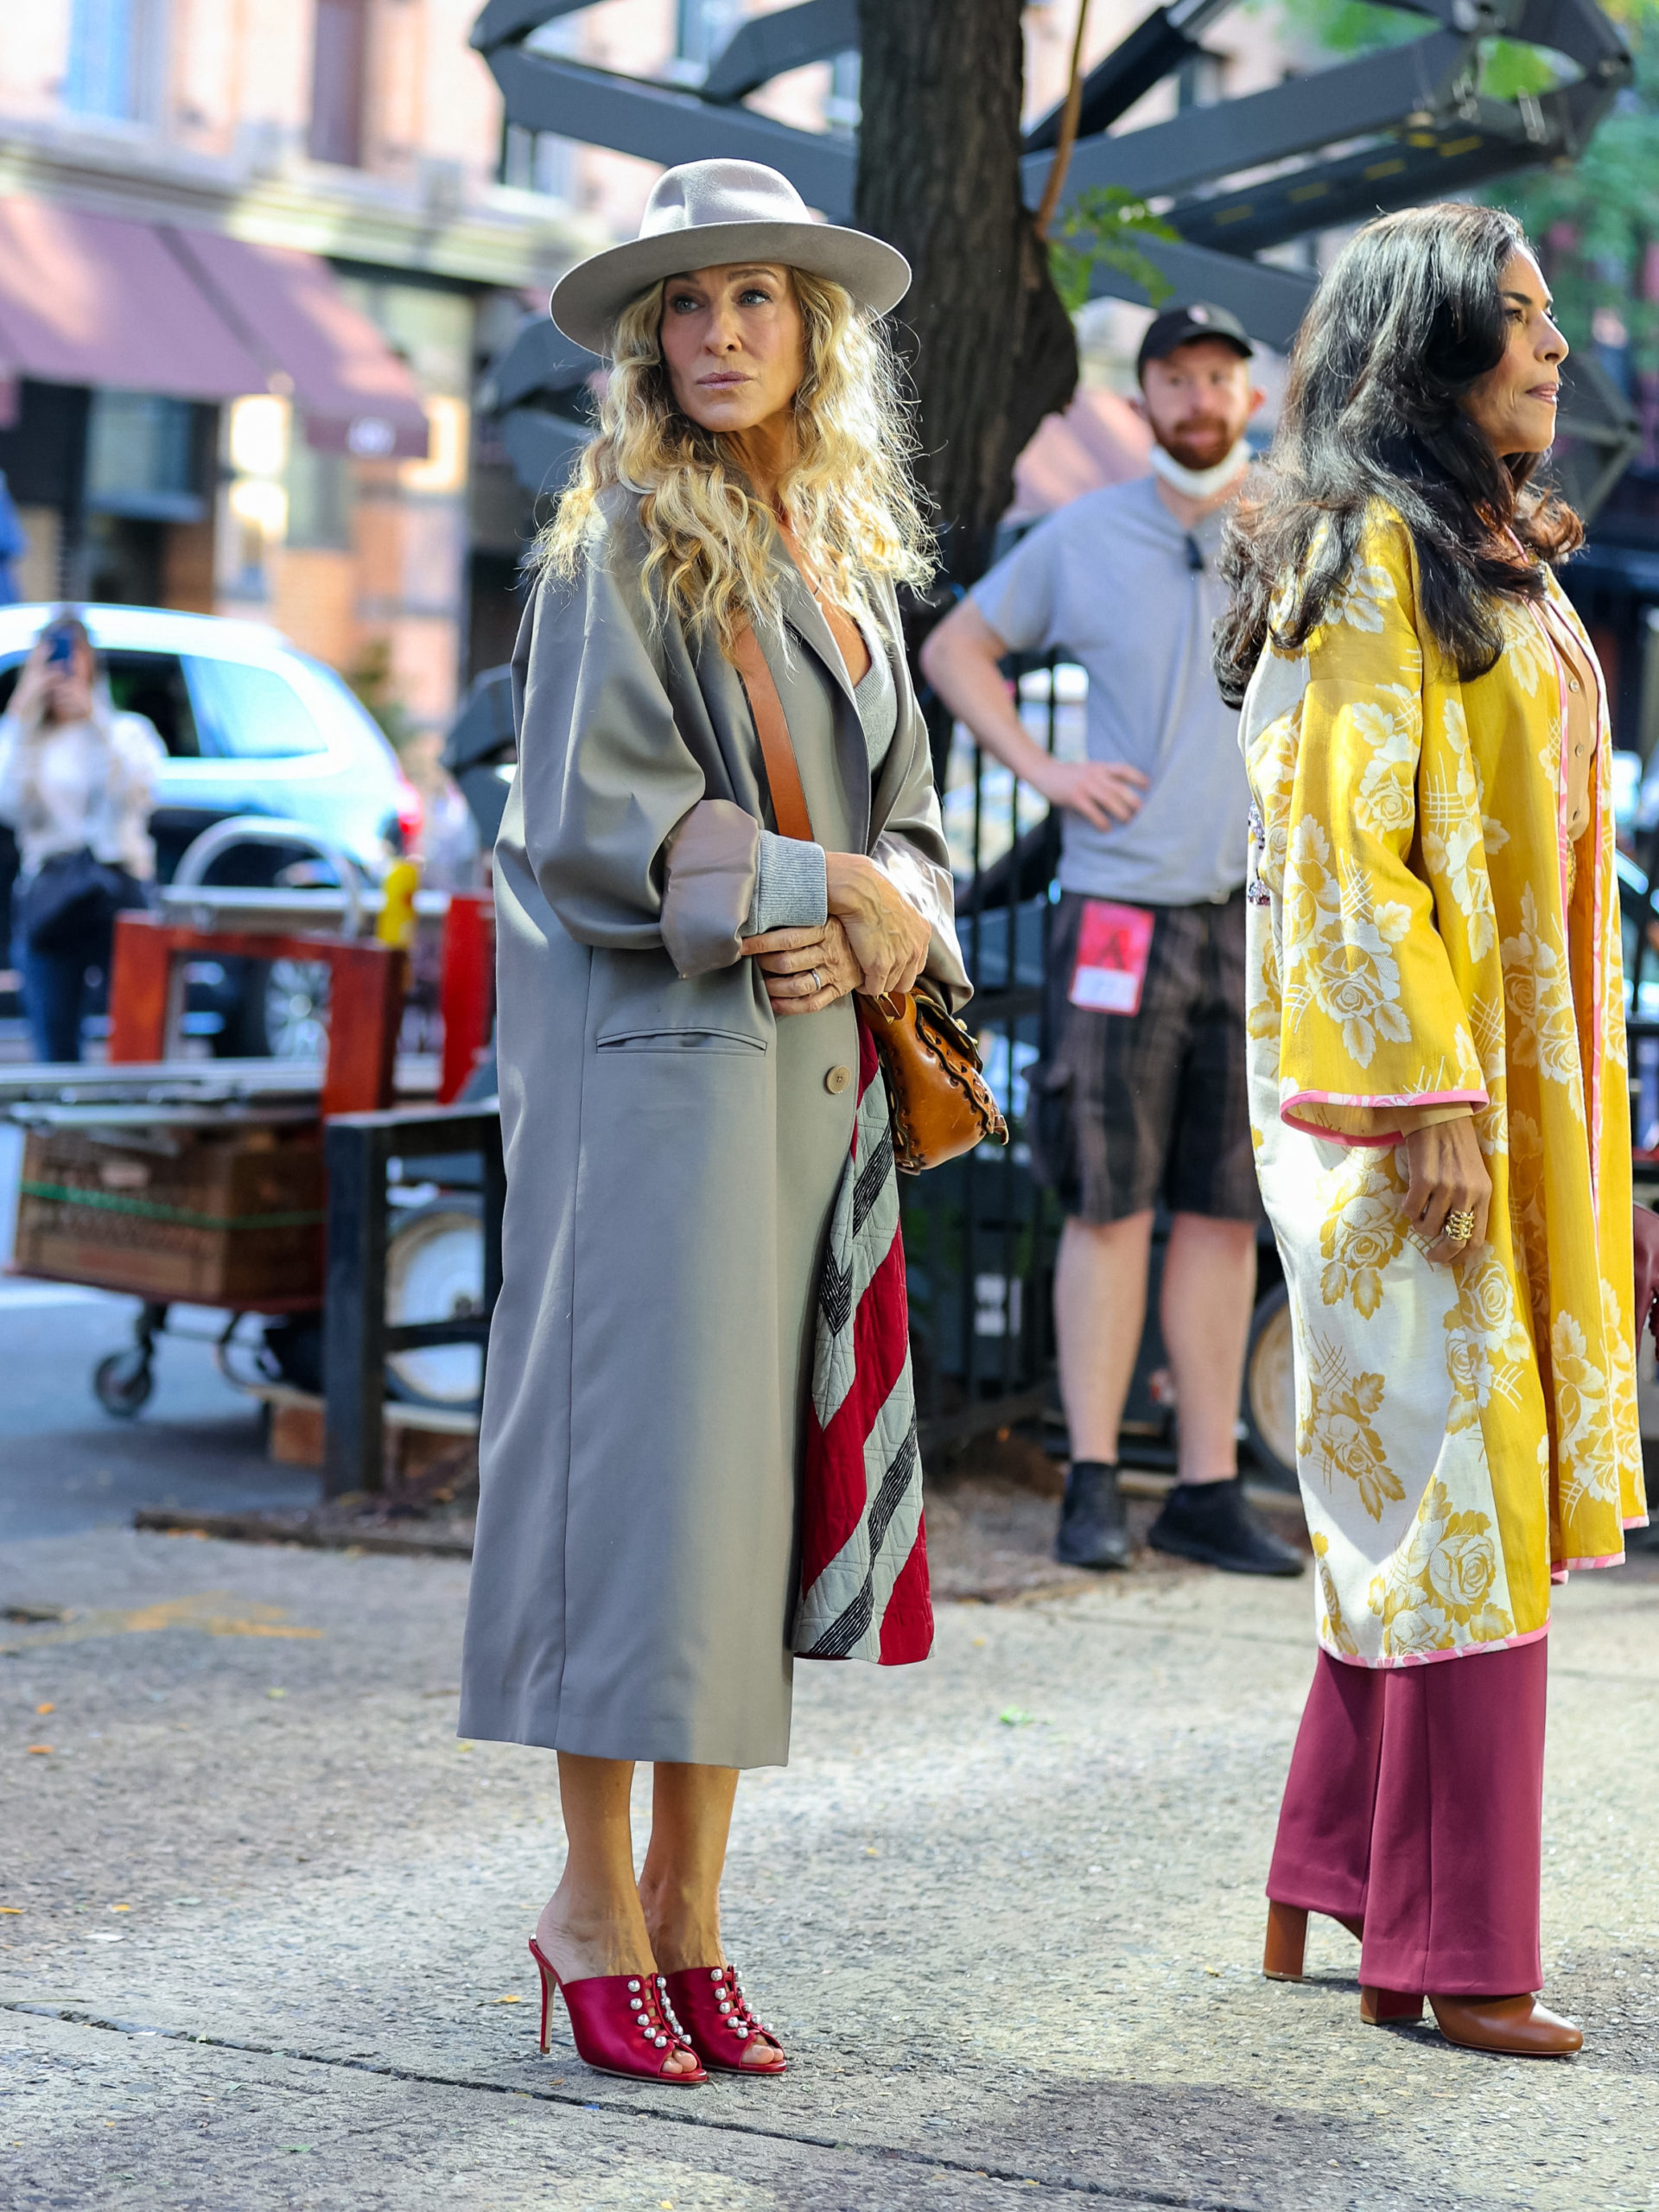 Sarah Jessica Parker Is Back On Set Following Wille Garson's ‘Unbearable’ Death